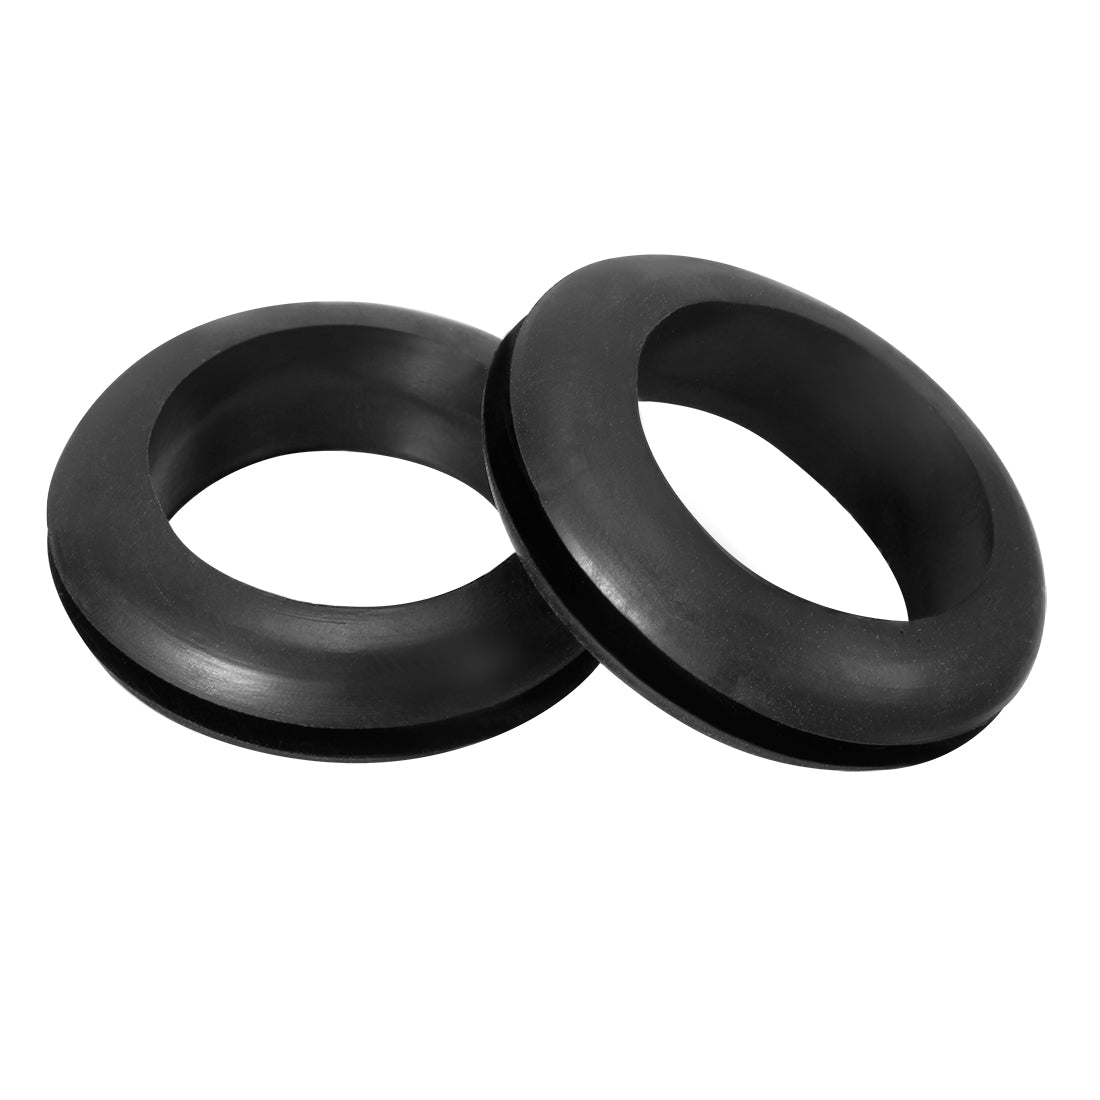 Uxcell Uxcell Wire Protector Oil Resistant Armature Rubber Grommet 18mm Inner Dia 300Pcs Black